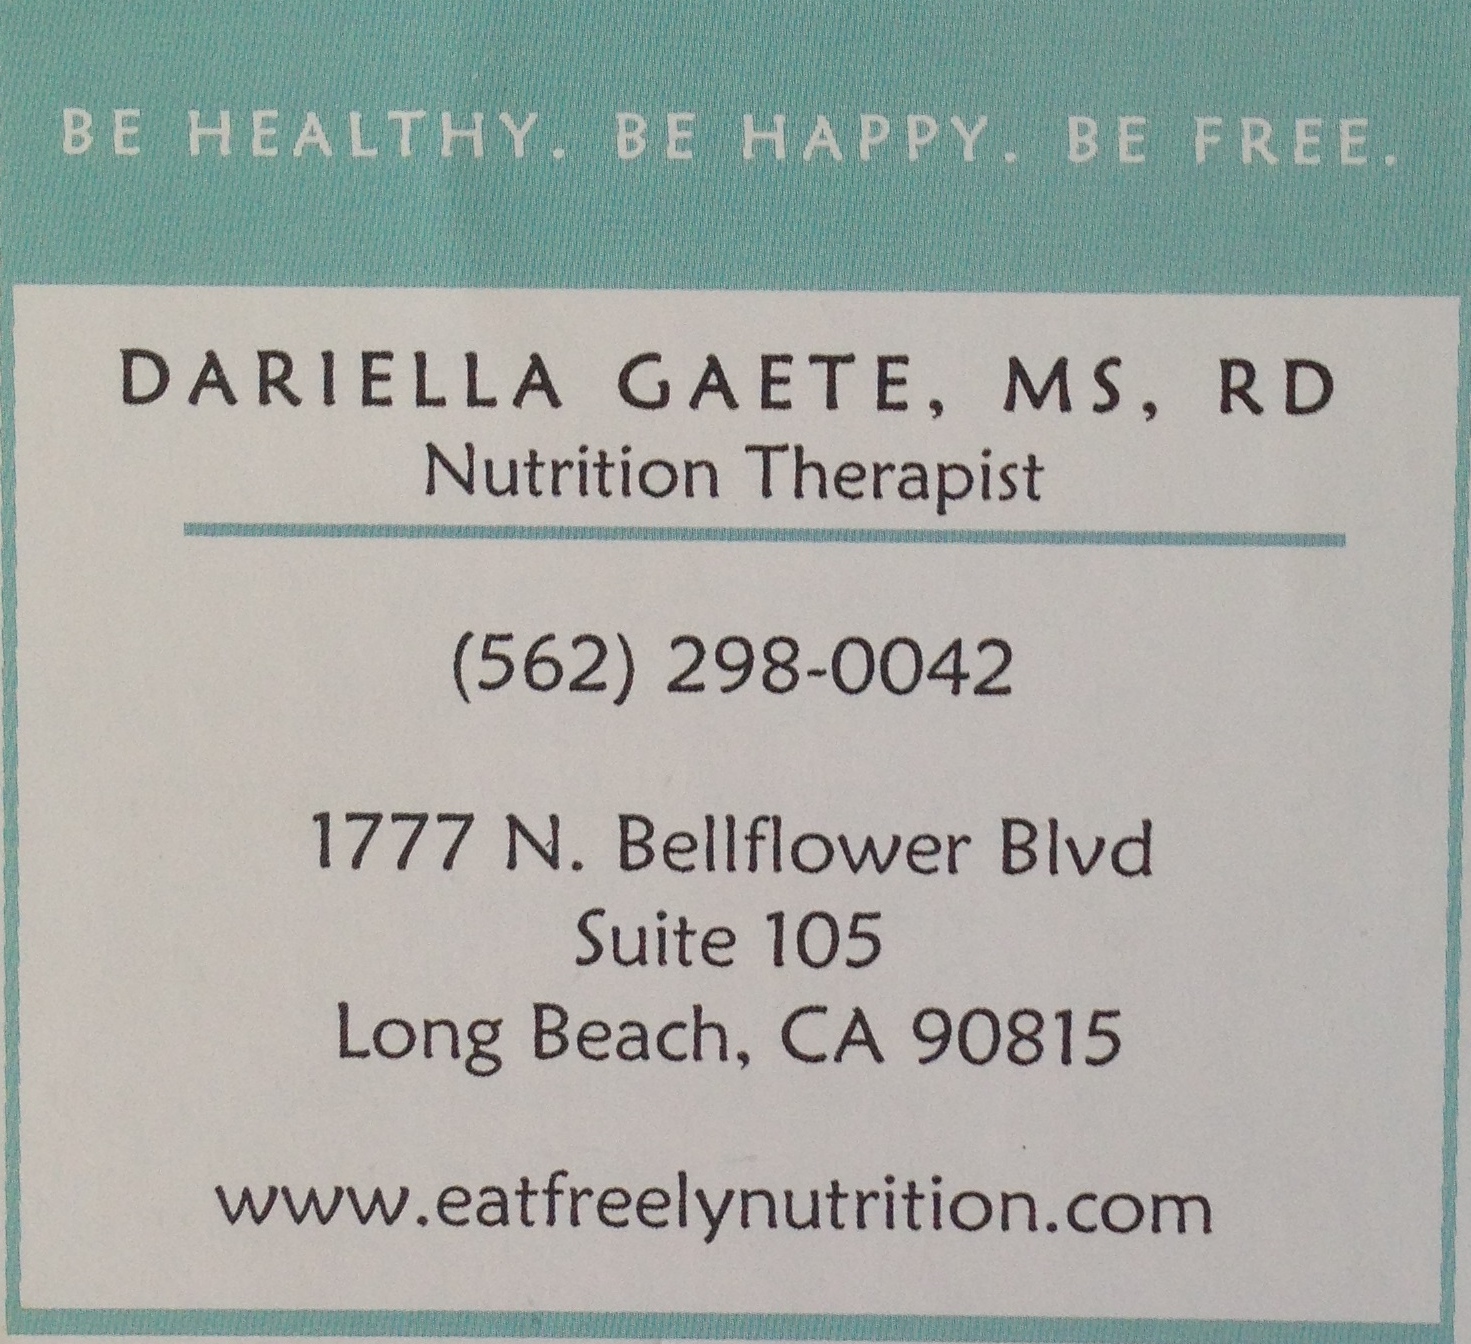 eat freely nutrition